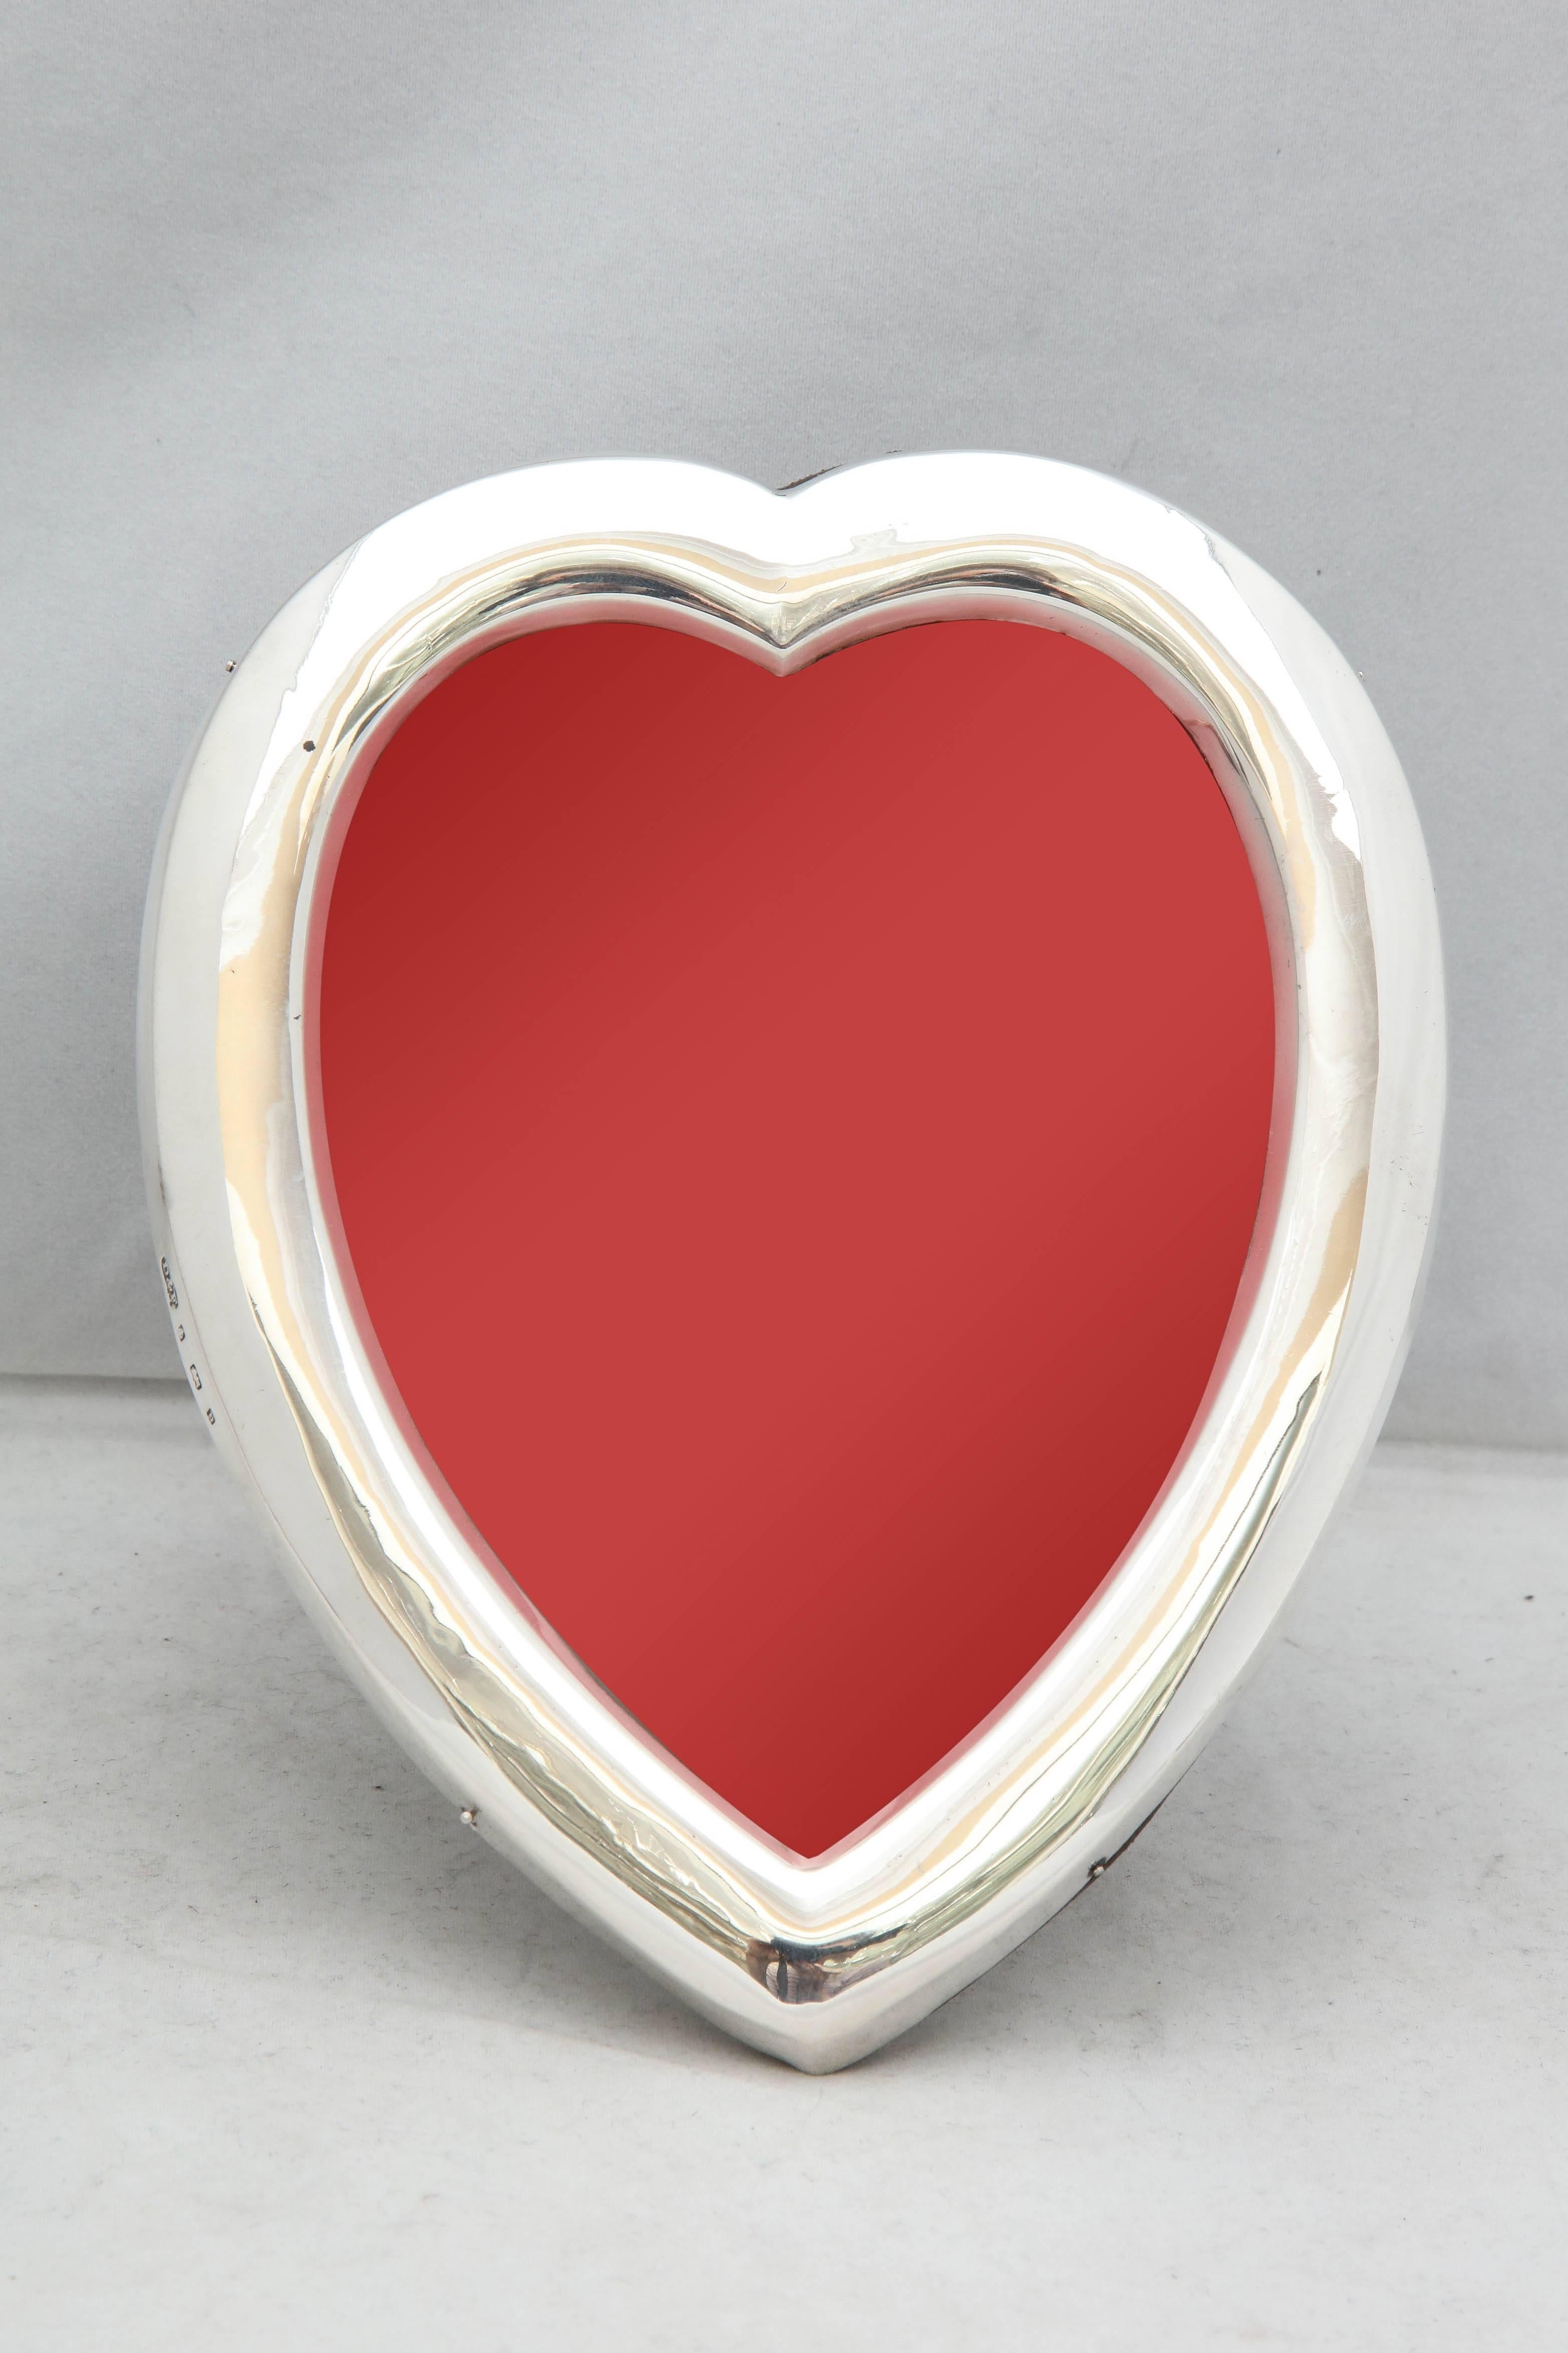 Edwardian, sterling silver heart-form picture frame, Birmingham, England, 1901, Deakin and Francis, Ltd. - makers. Brown leather back is hinged to allow insertion of photo. Stands 7 inches high x 5 1/2 inches wide at widest point x 5 1/2 inches deep